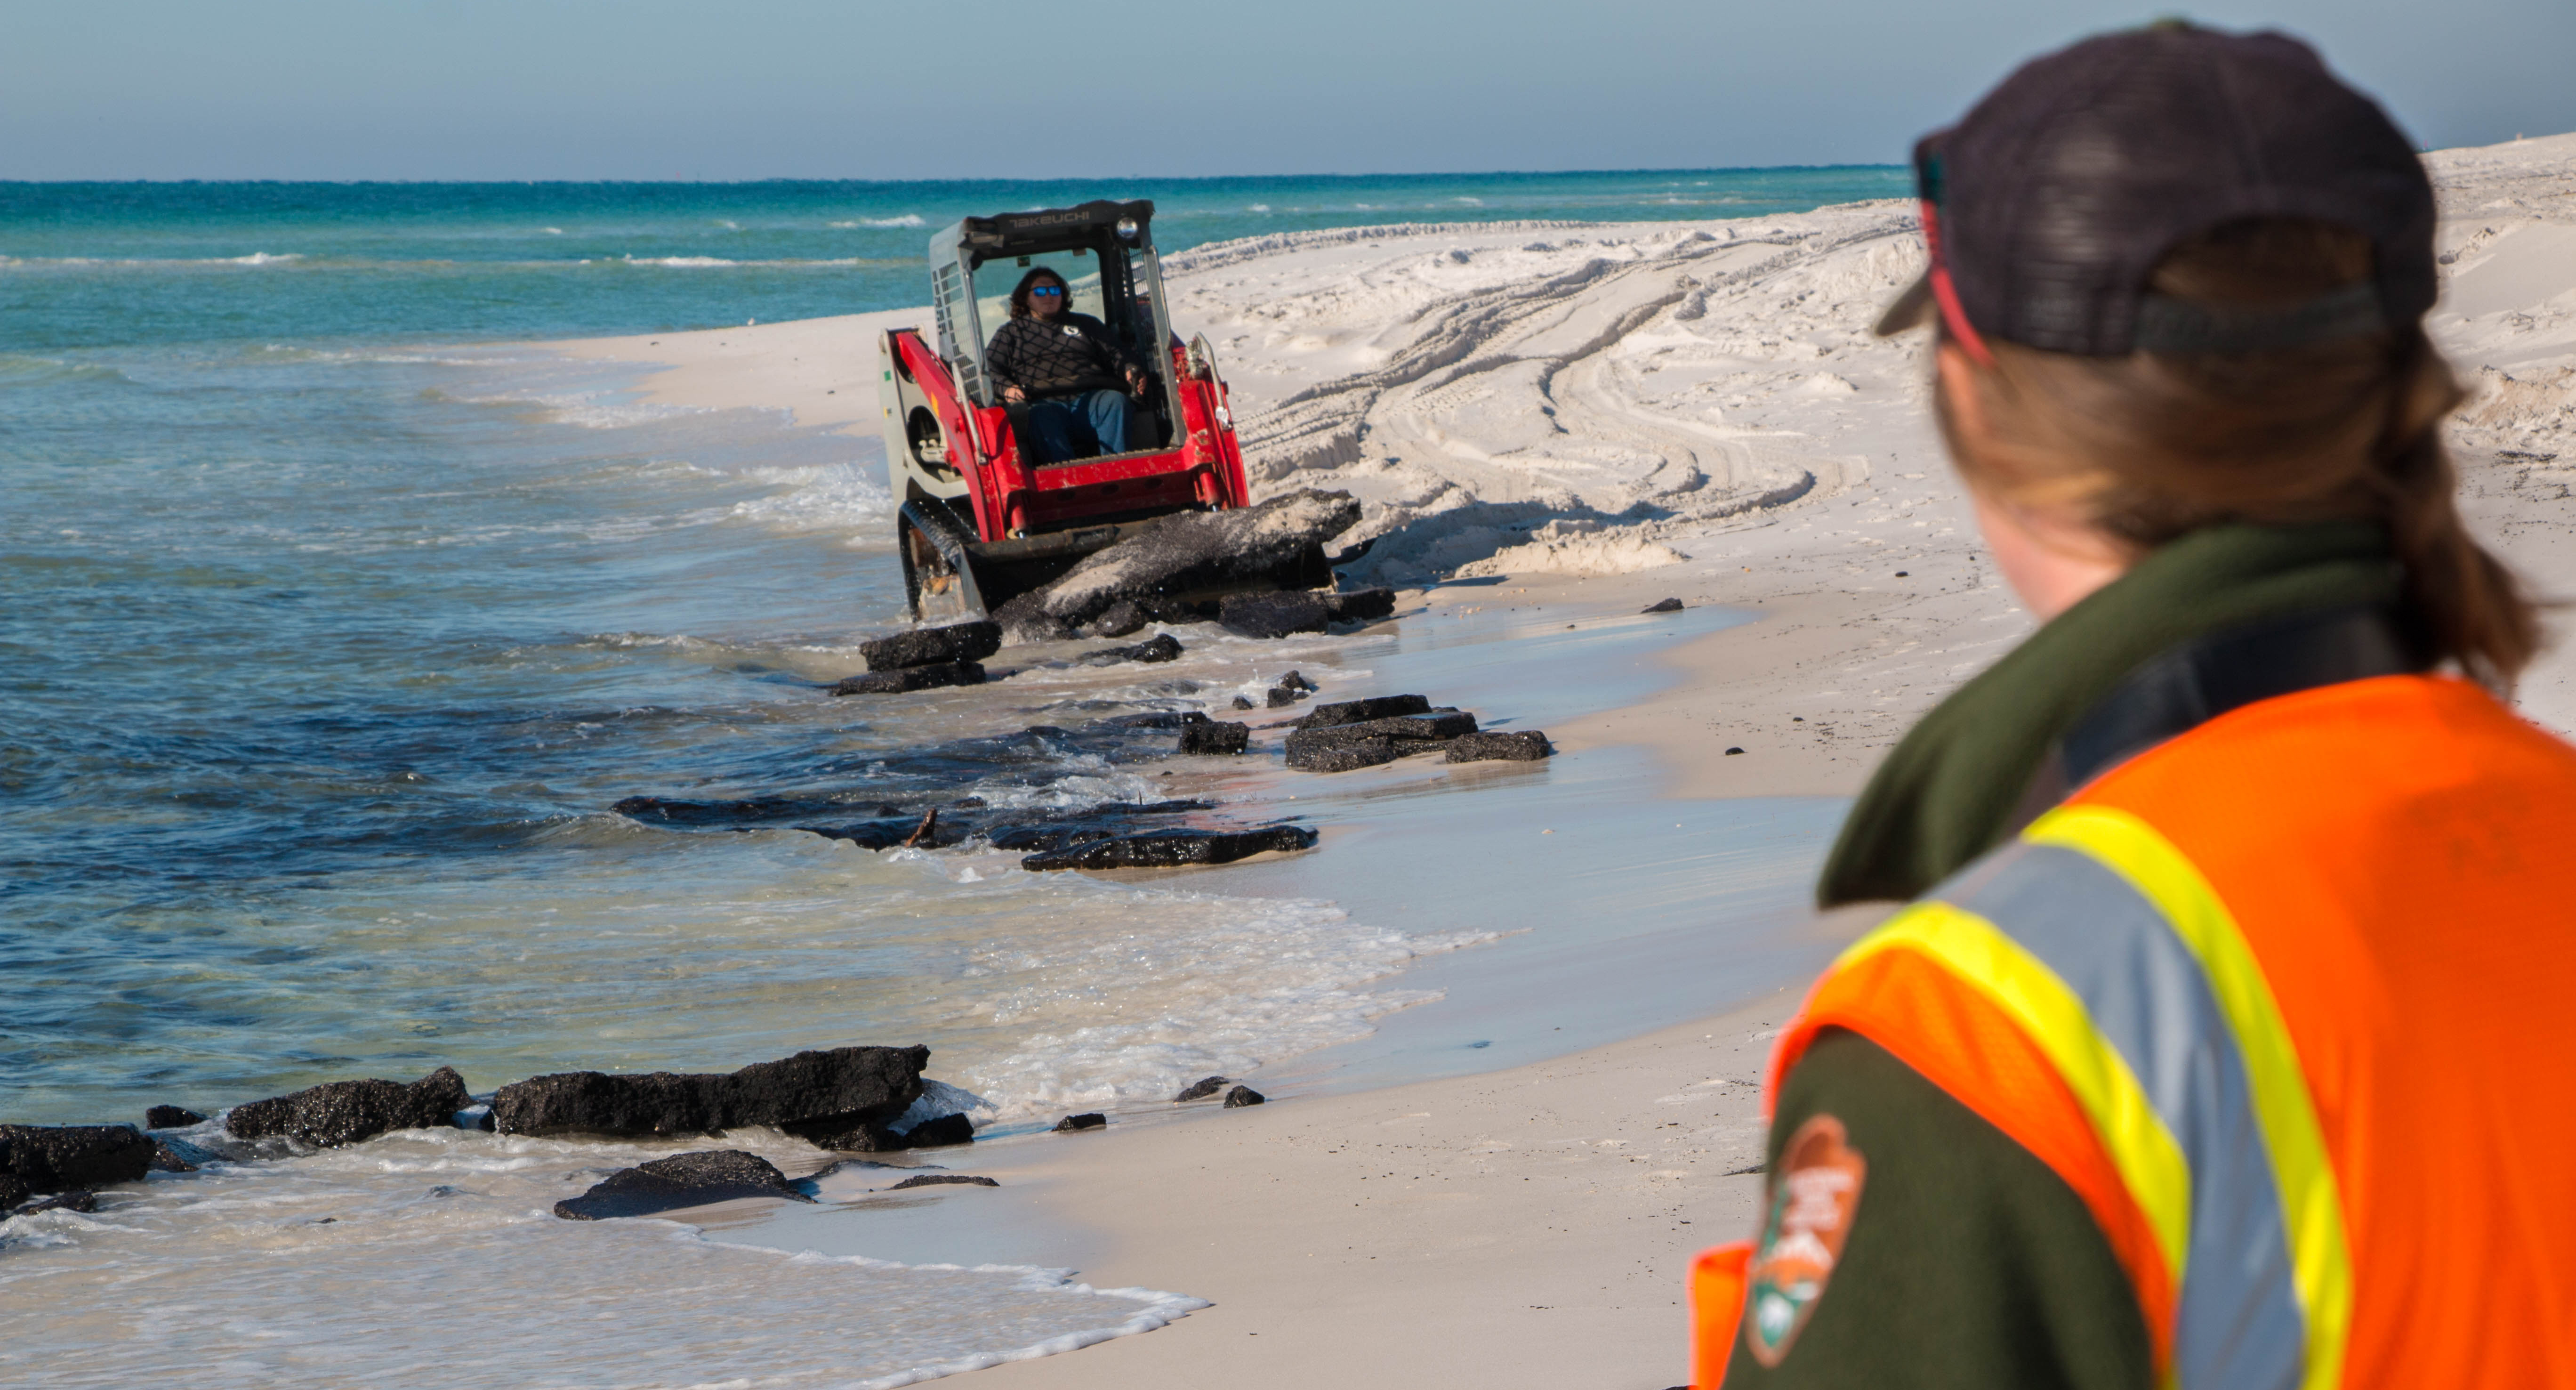 A small front-end loader picks up asphalt debris from the beach at the water line as a ranger looks on.